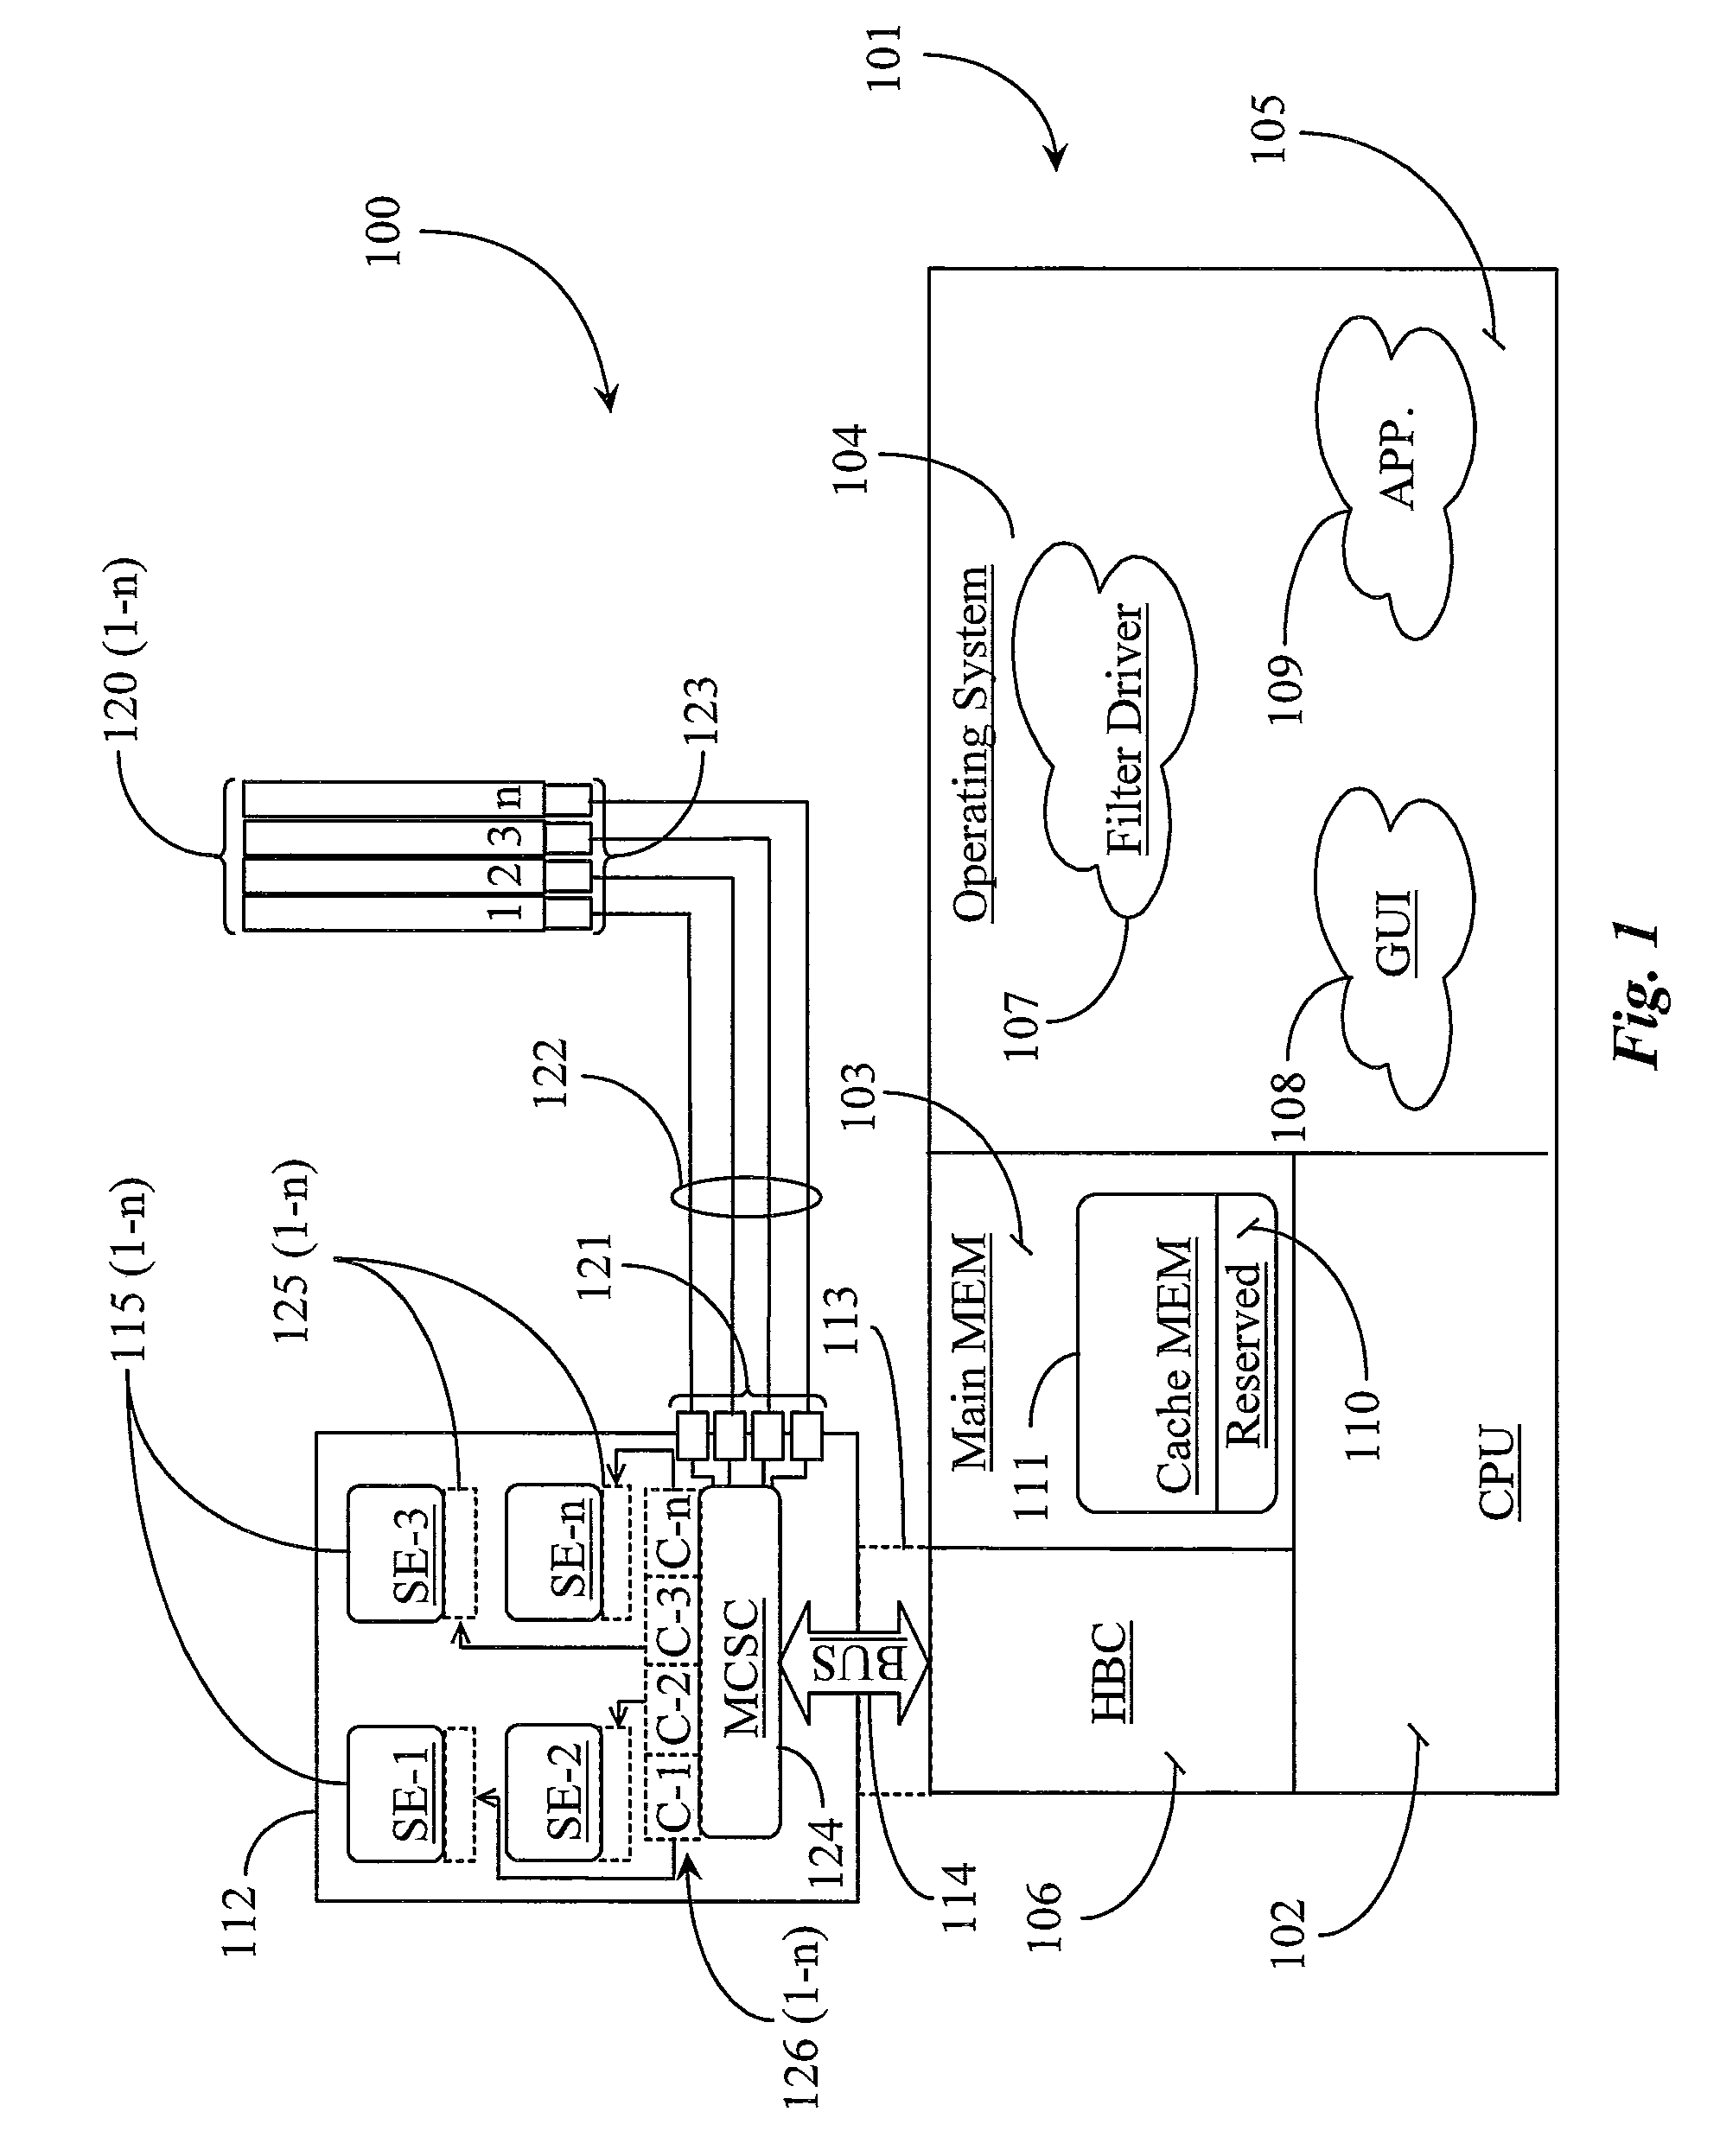 System for Controlling Performance Aspects of a Data Storage and Access Routine